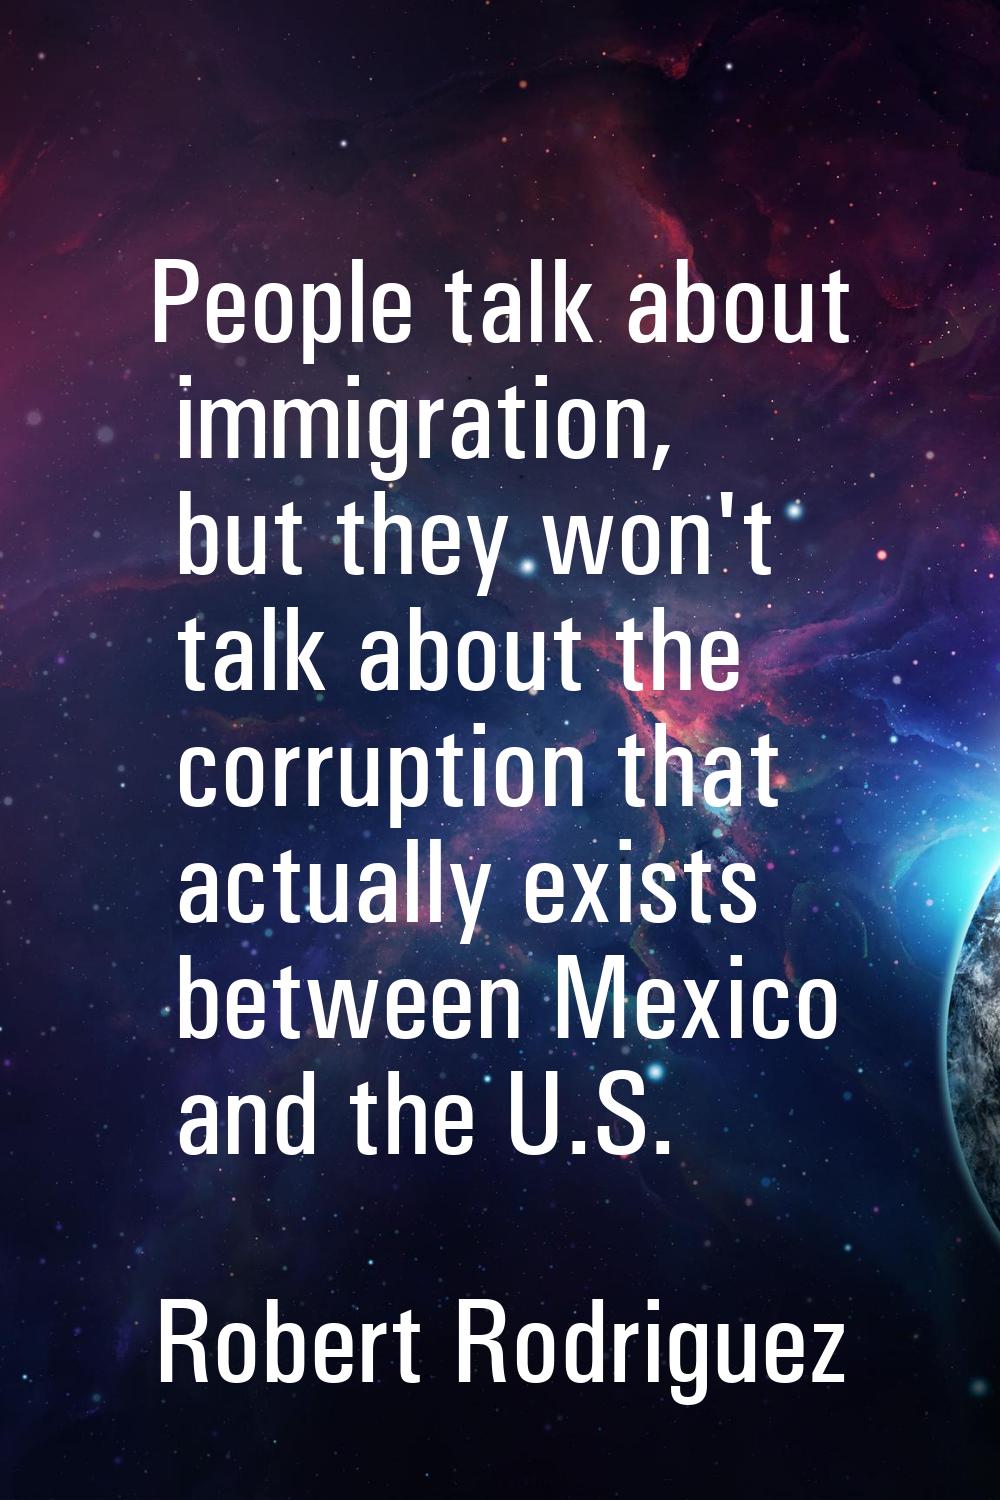 People talk about immigration, but they won't talk about the corruption that actually exists betwee